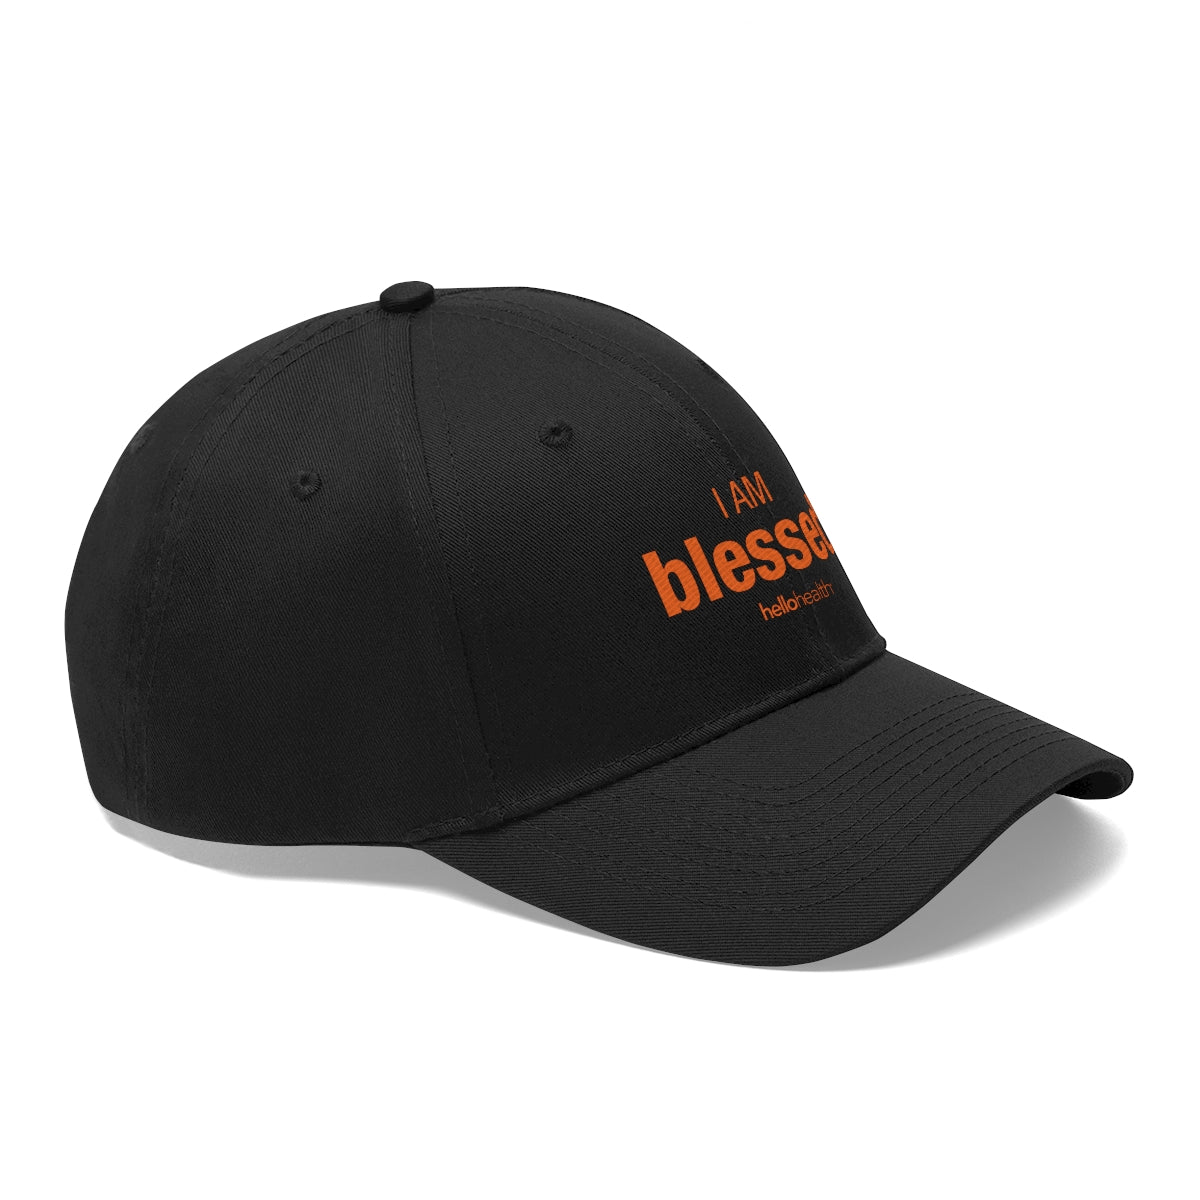 I am blessed Twill Hat